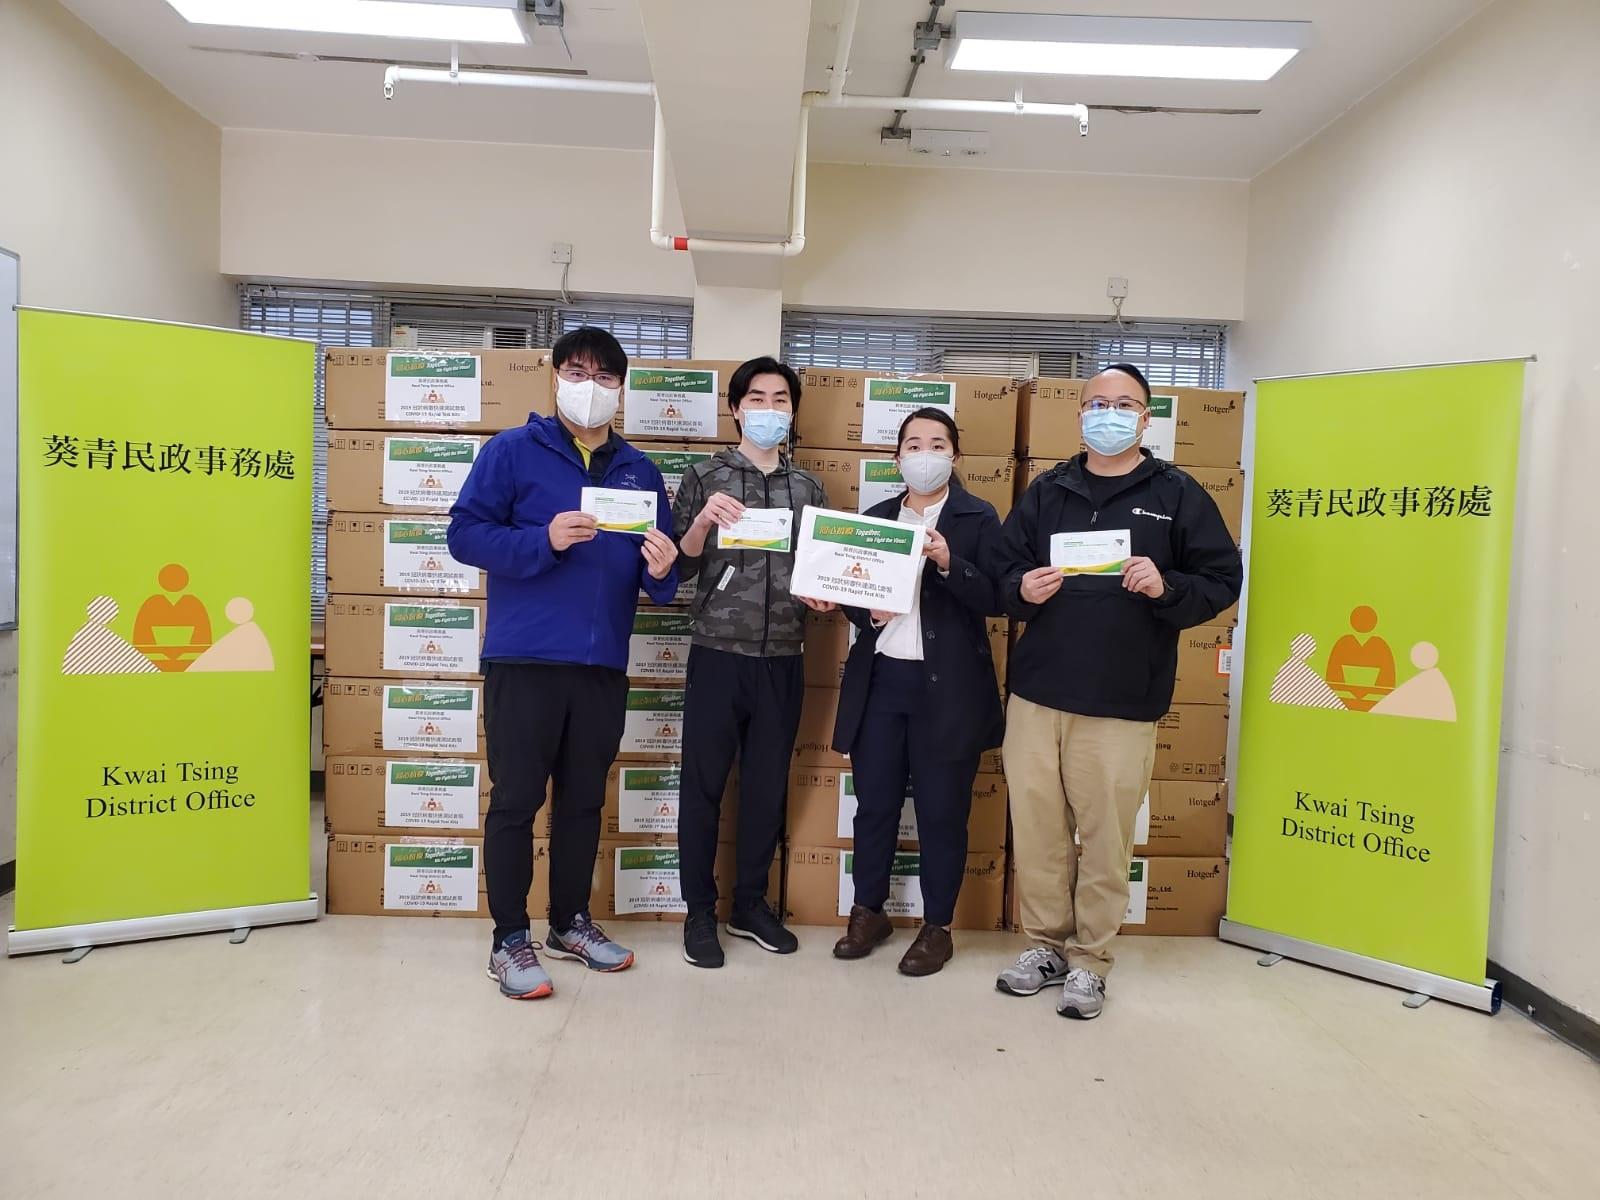 The Kwai Tsing District Office today (March 3) distributed COVID-19 rapid test kits to households, cleansing workers and property management staff living and working in Cheung Wang Estate, Tsing Yi, for voluntary testing through the Property Service Management Office of the Housing Department.